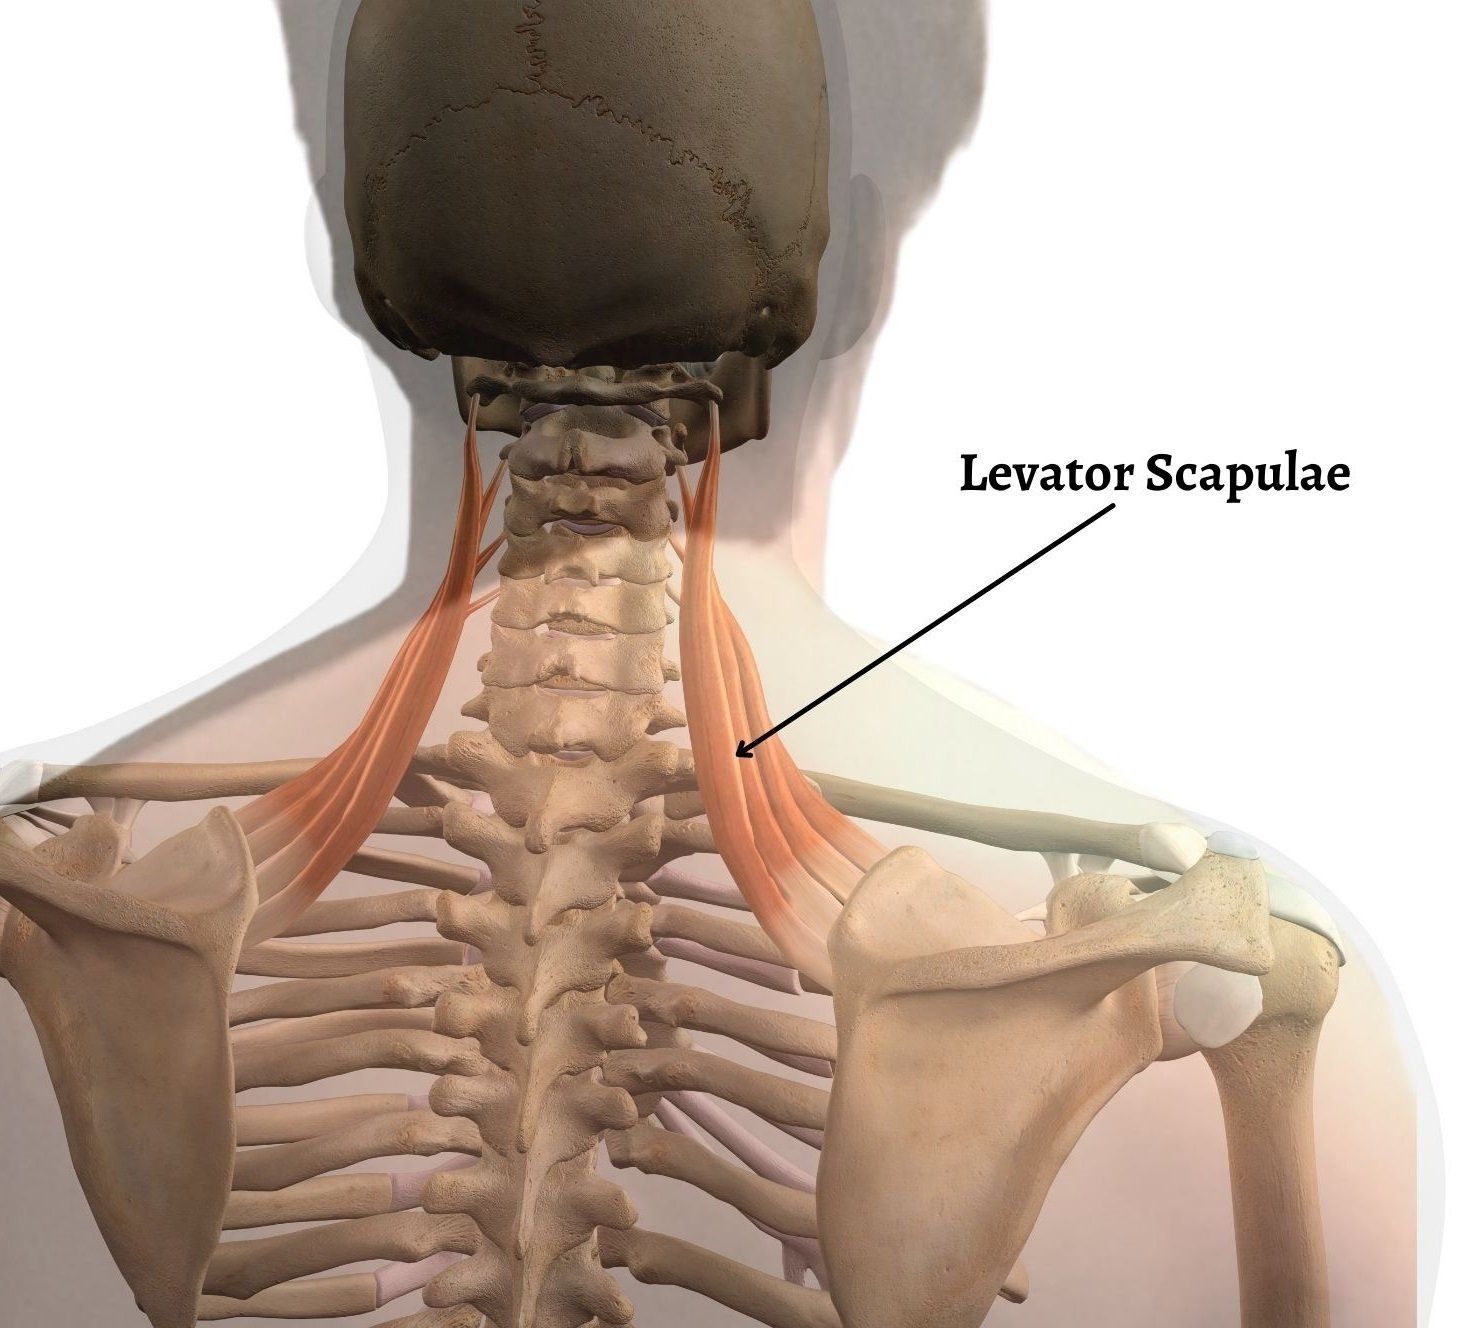 Active Physio Works :: Neck pain? What are these deep neck flexors